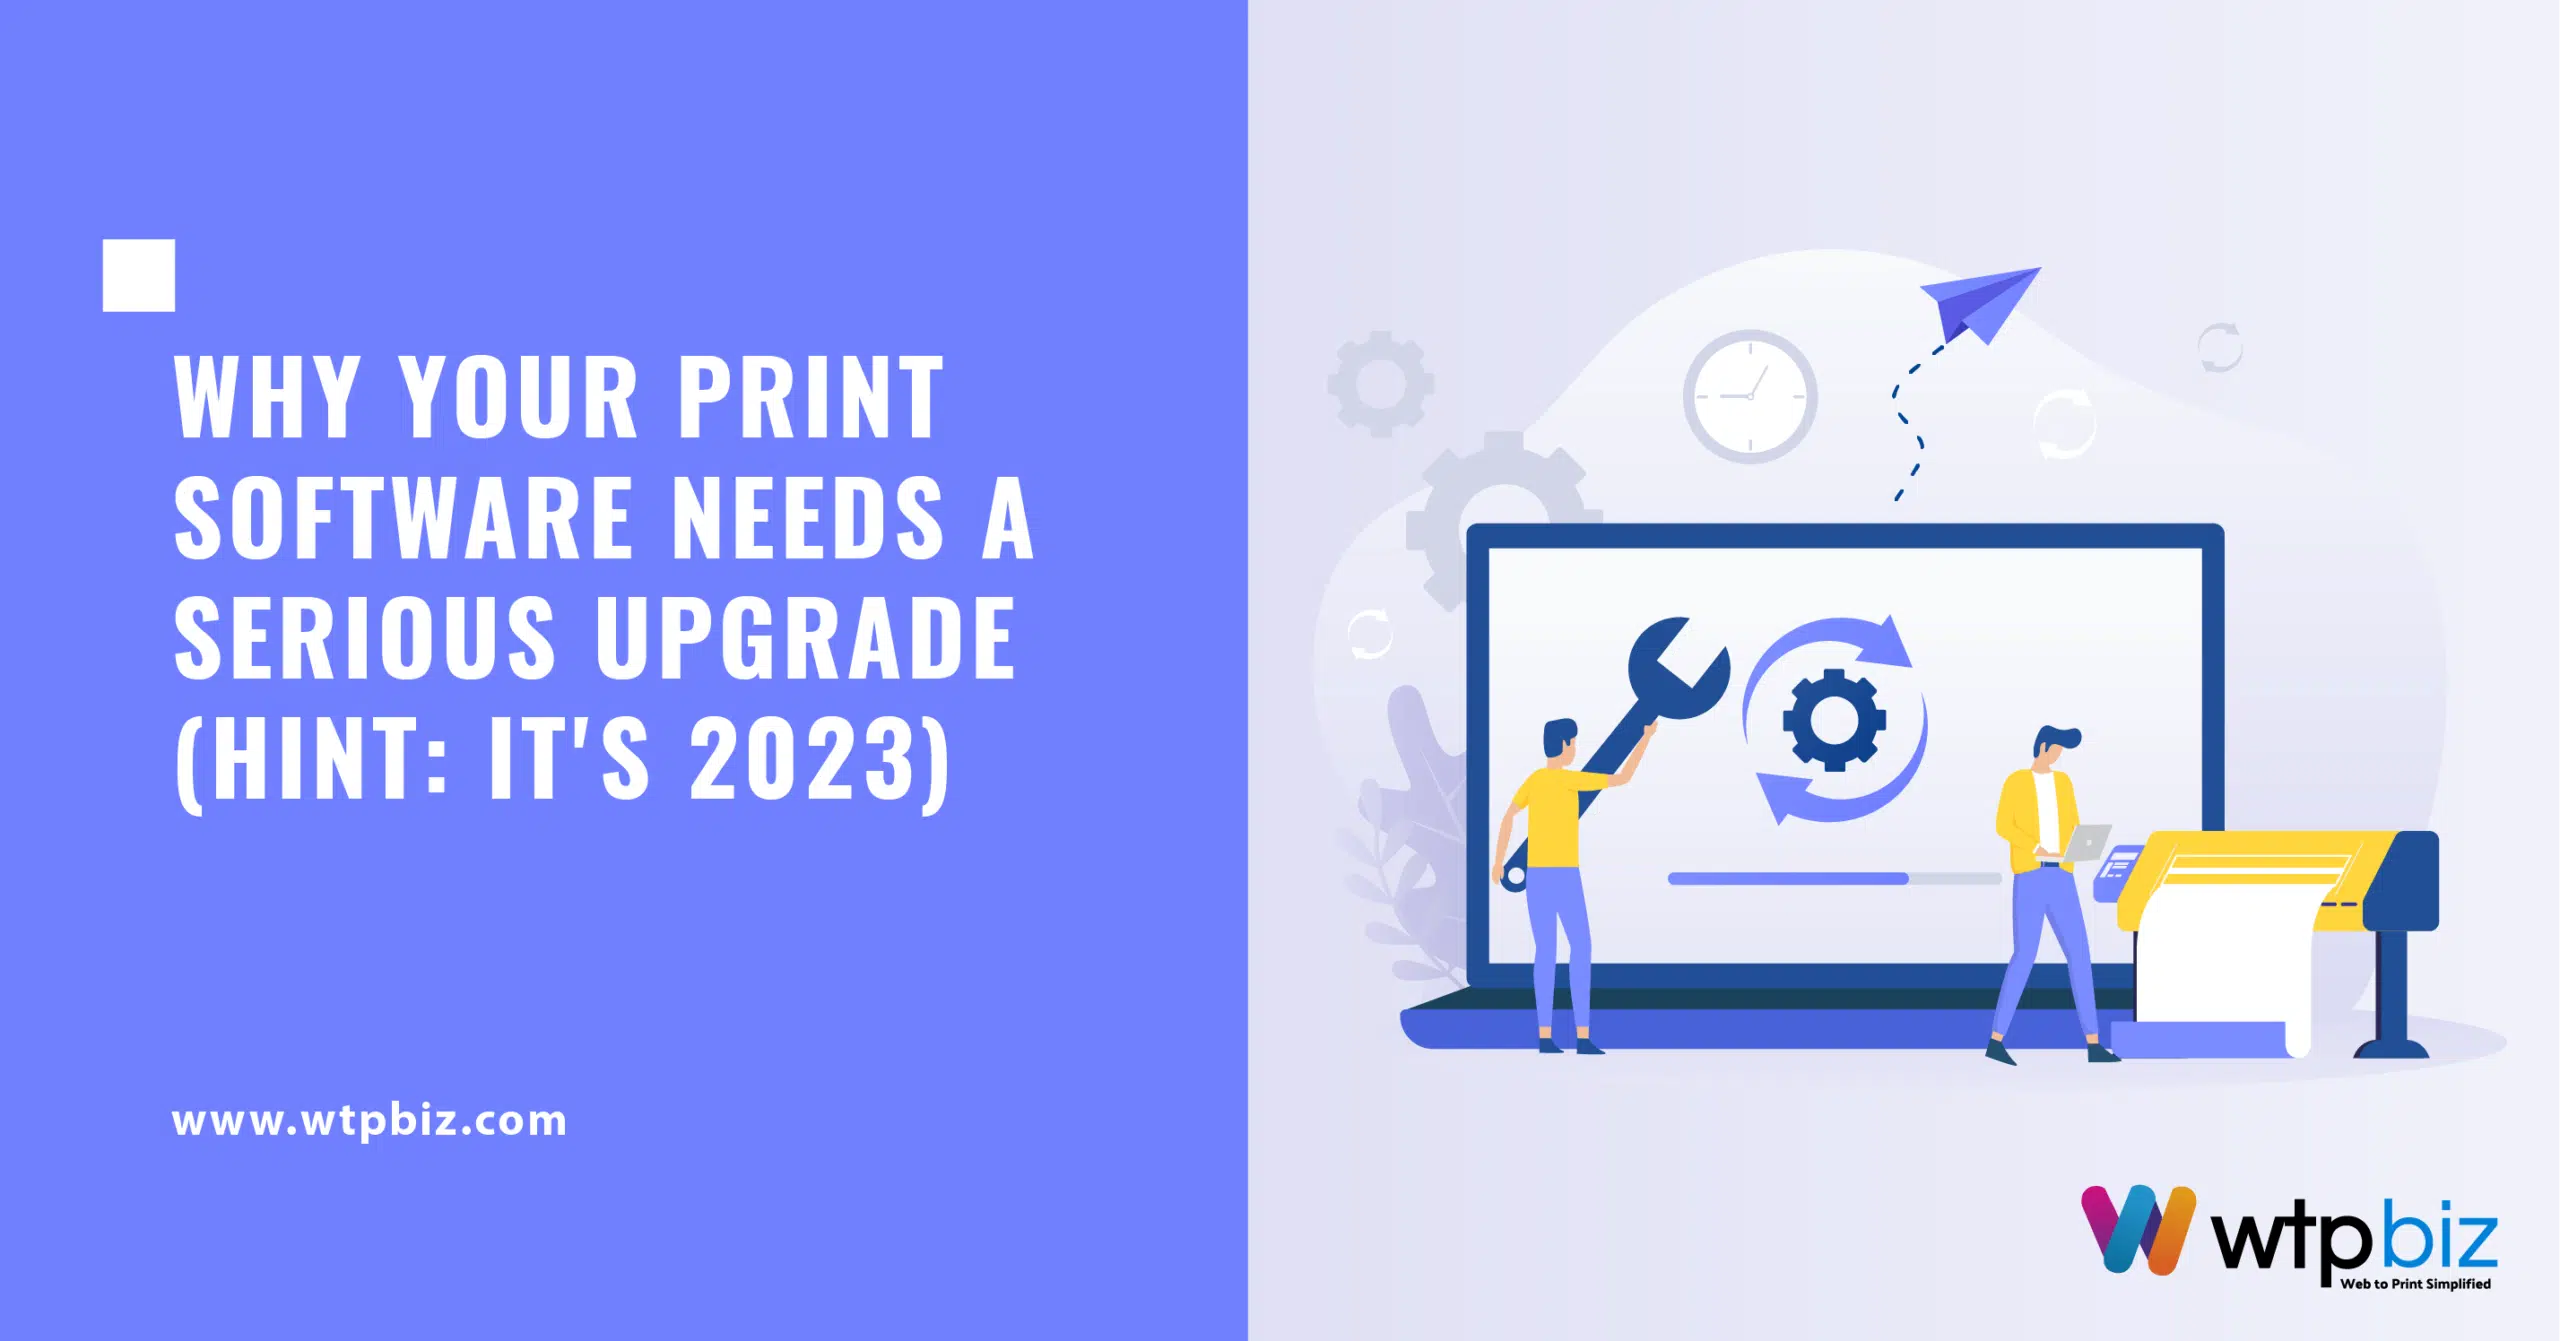 Why Your Print Software Needs a Serious Upgrade